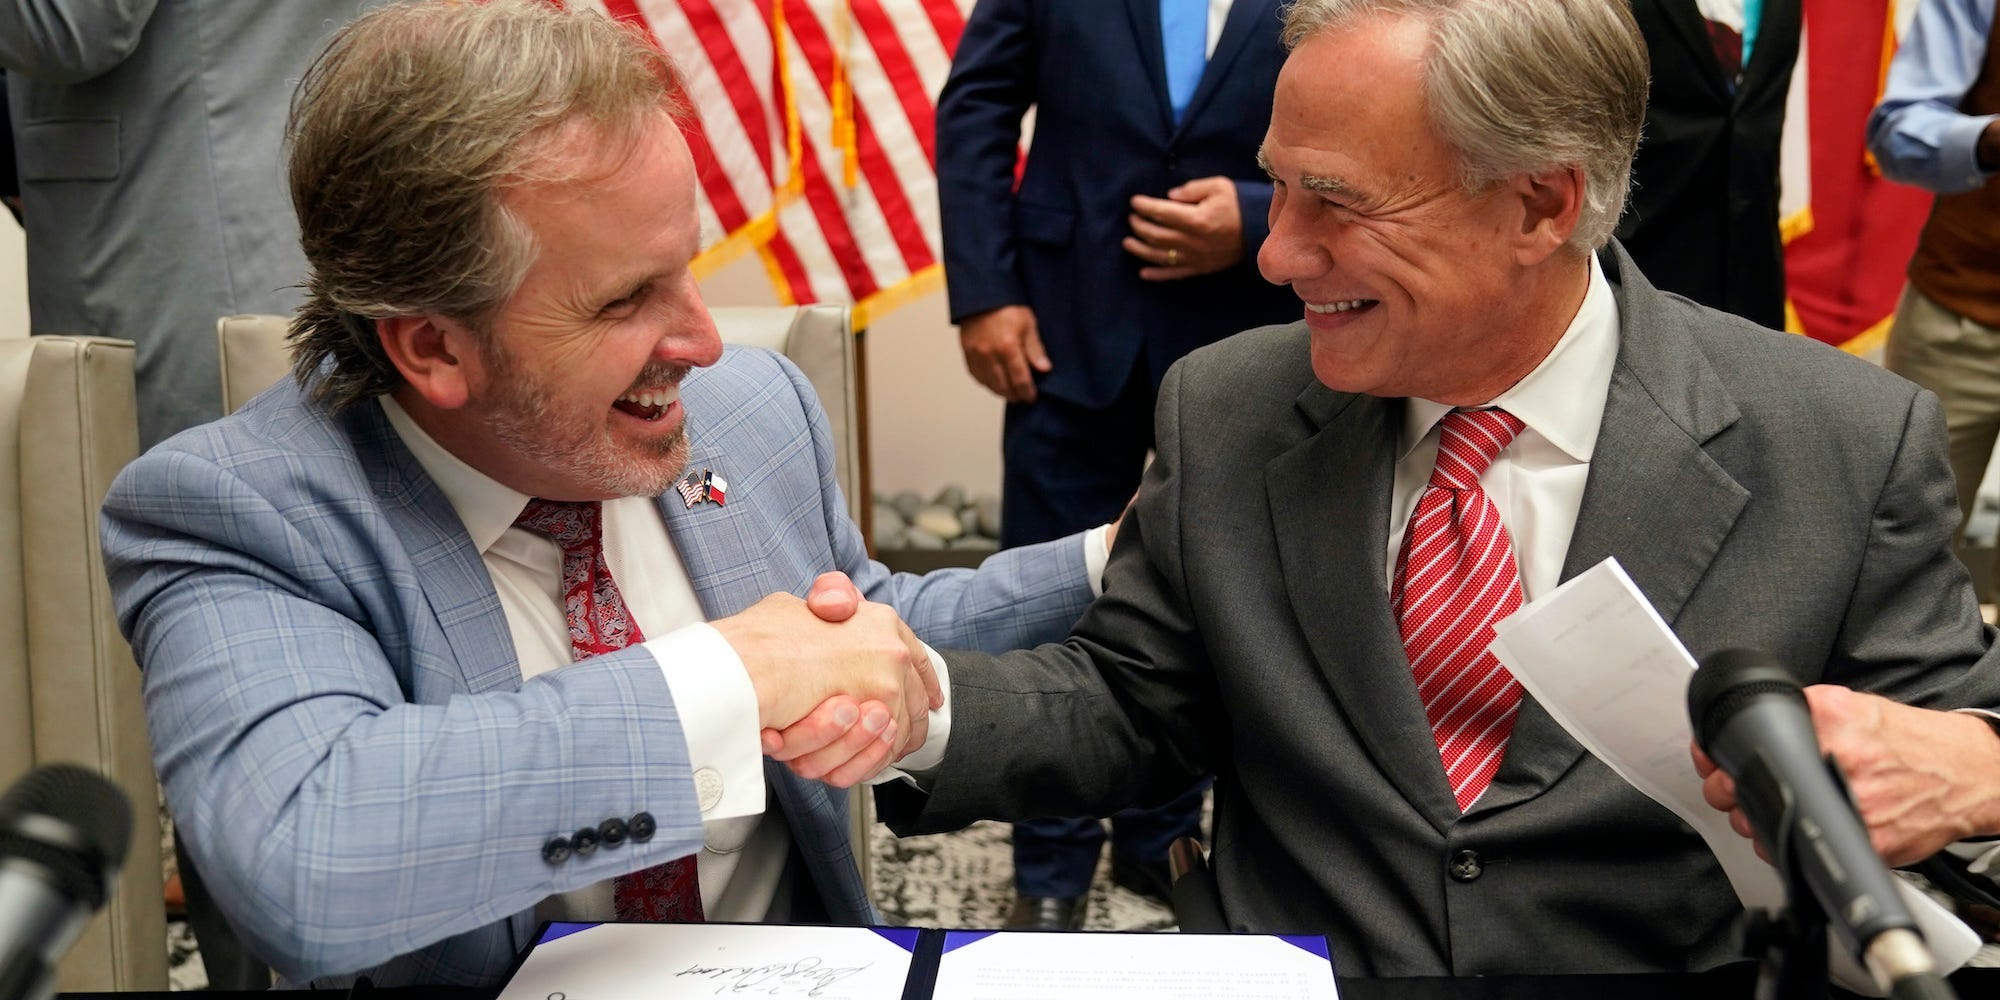 Texas Gov Greg Abbott and State Sen. Bryan Hughes, R-Mineola, shake hands after Abbott signed Senate Bill 1, also known as the election integrity bill, into law in Tyler, Texas, Tuesday, Sept. 7, 2021.